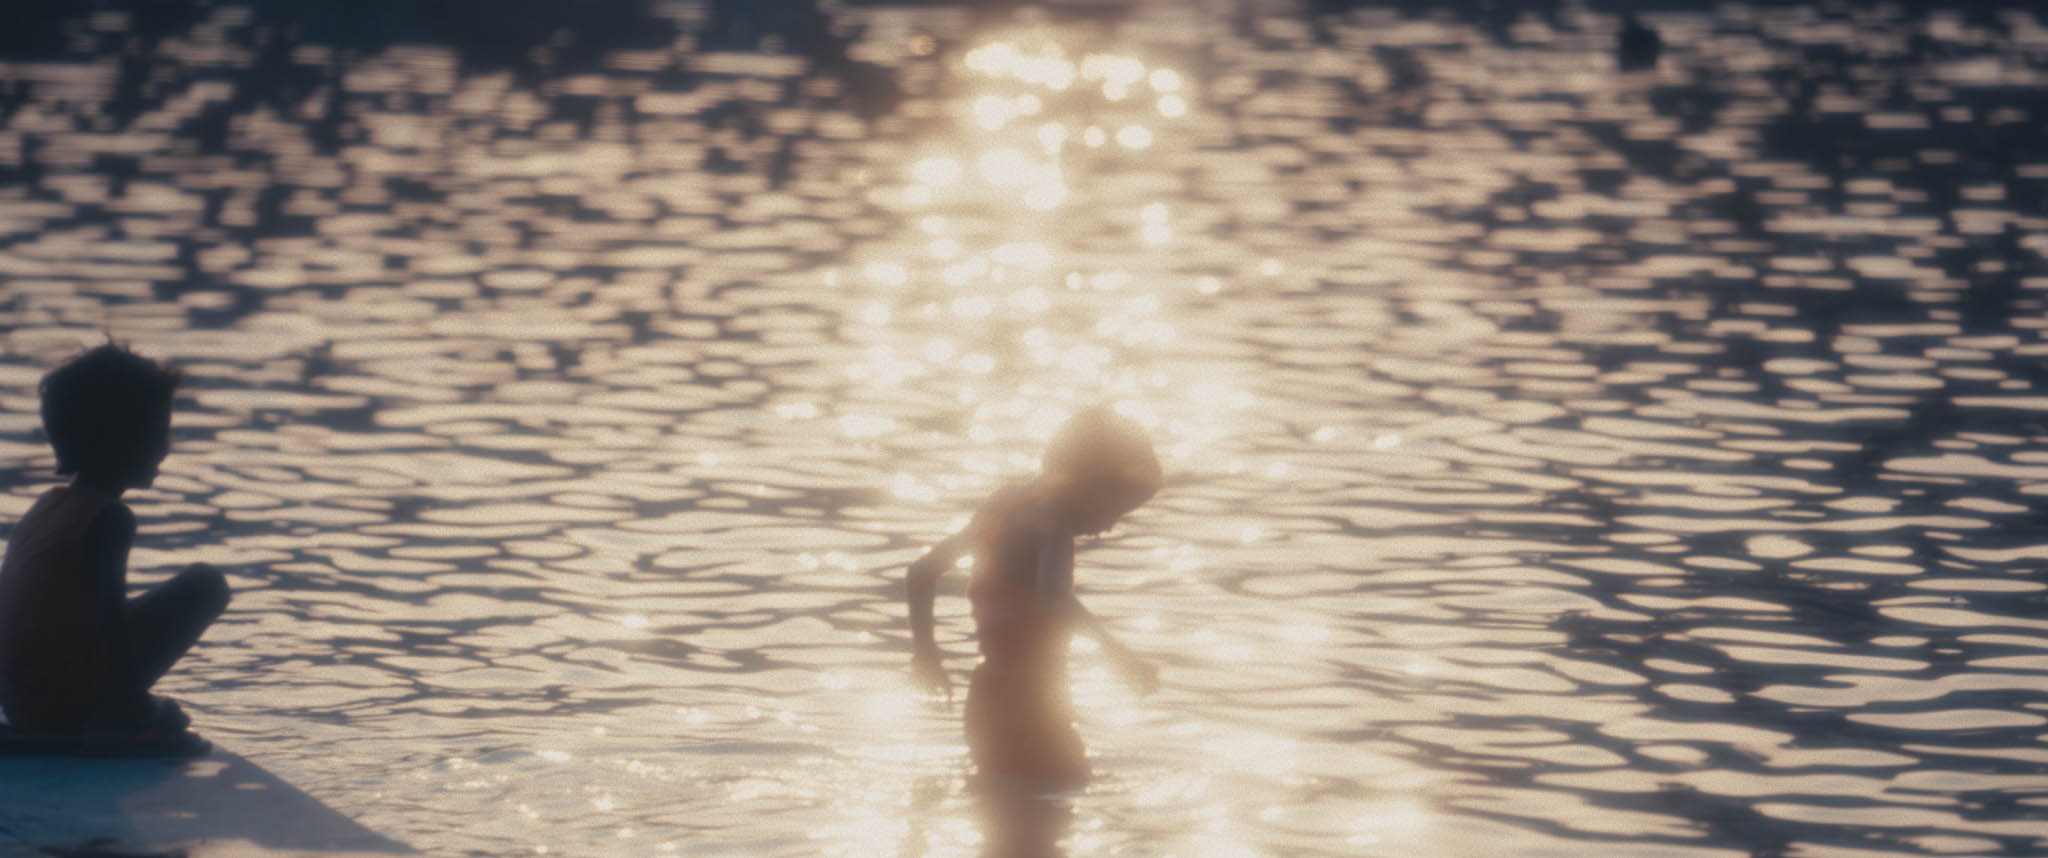 silhouette of a child in water